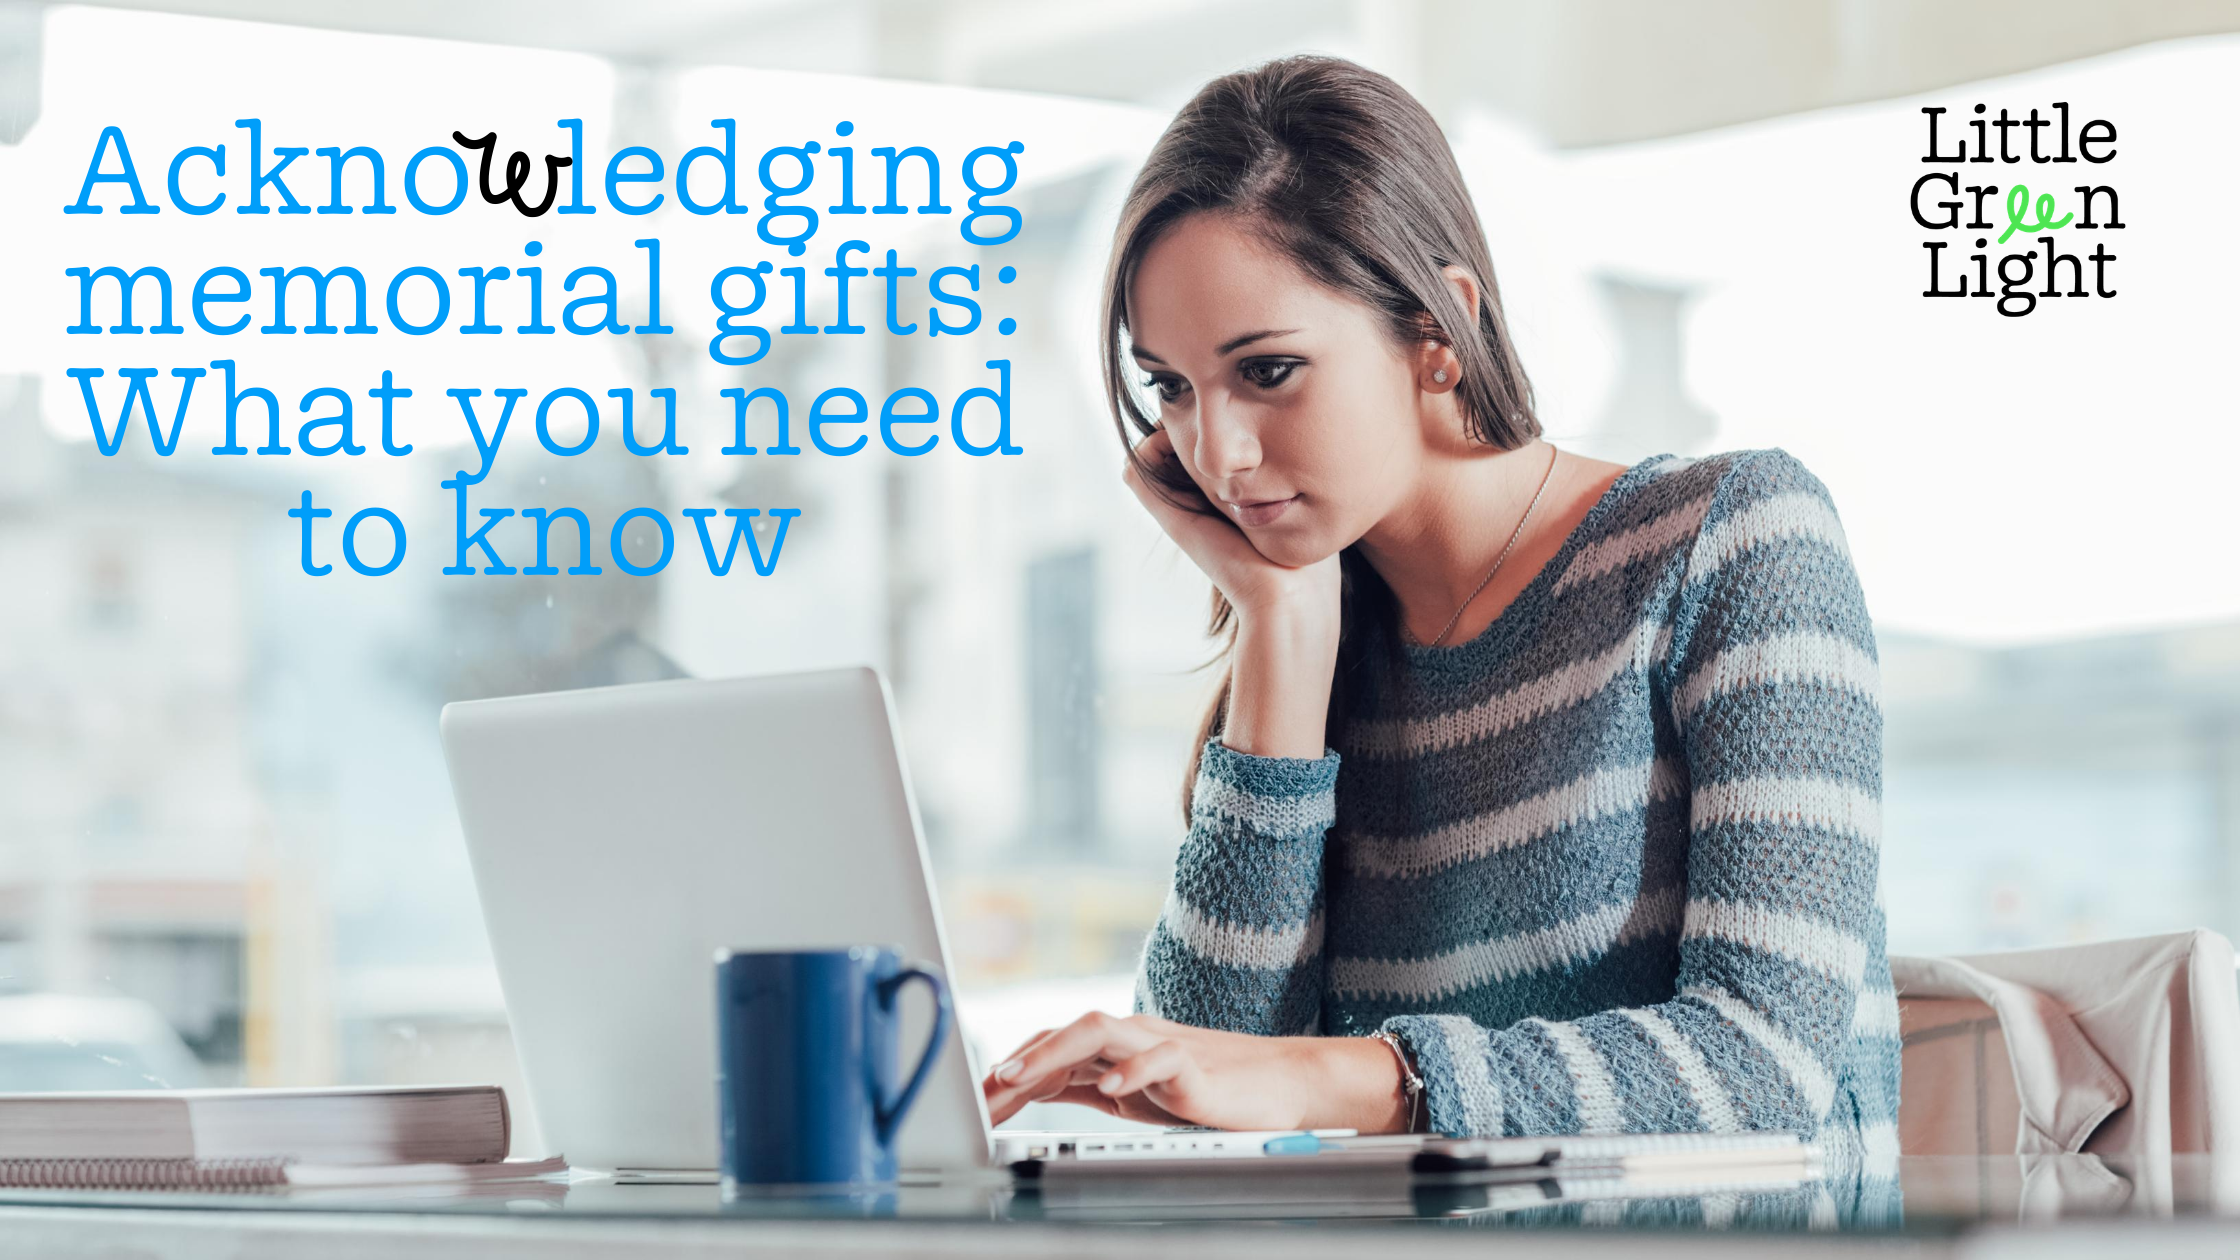 Acknowledging memorial gifts: What you need to know